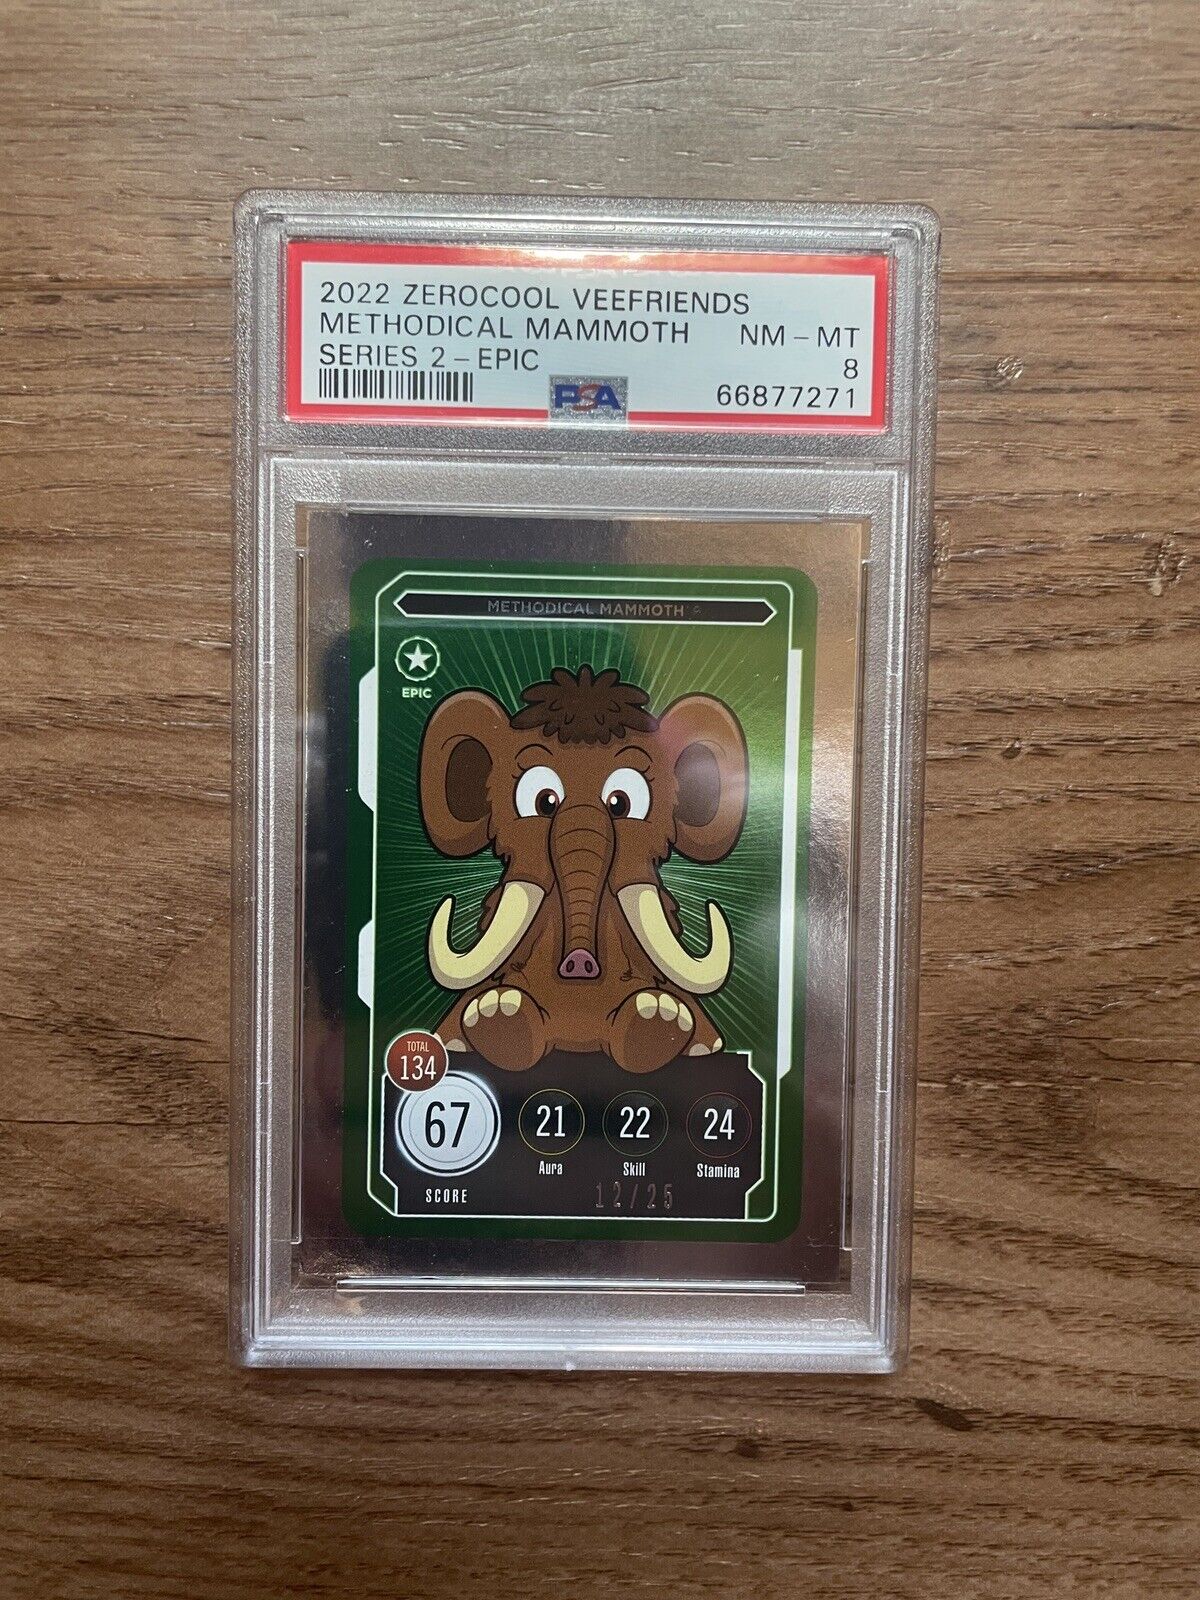 Veefriends Compete and Collect Cards Methodical Mammoth Epic Series 2 Graded PSA